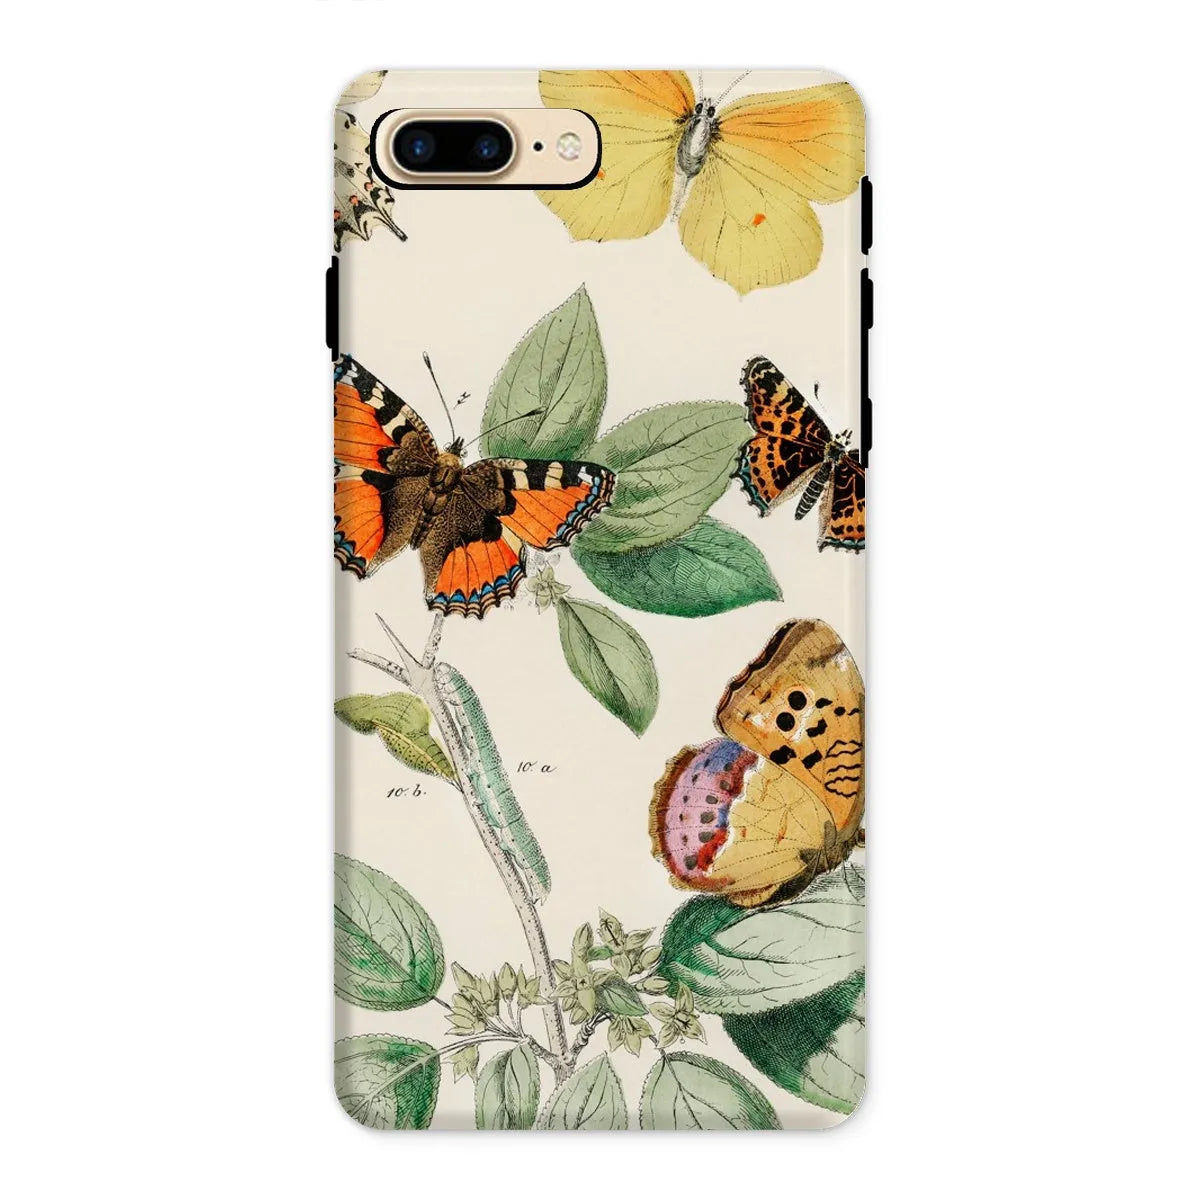 Butterfly Aesthetic Art Phone Case - William Forsell Kirby - Iphone 8 Plus / Matte - Mobile Phone Cases - Aesthetic Art